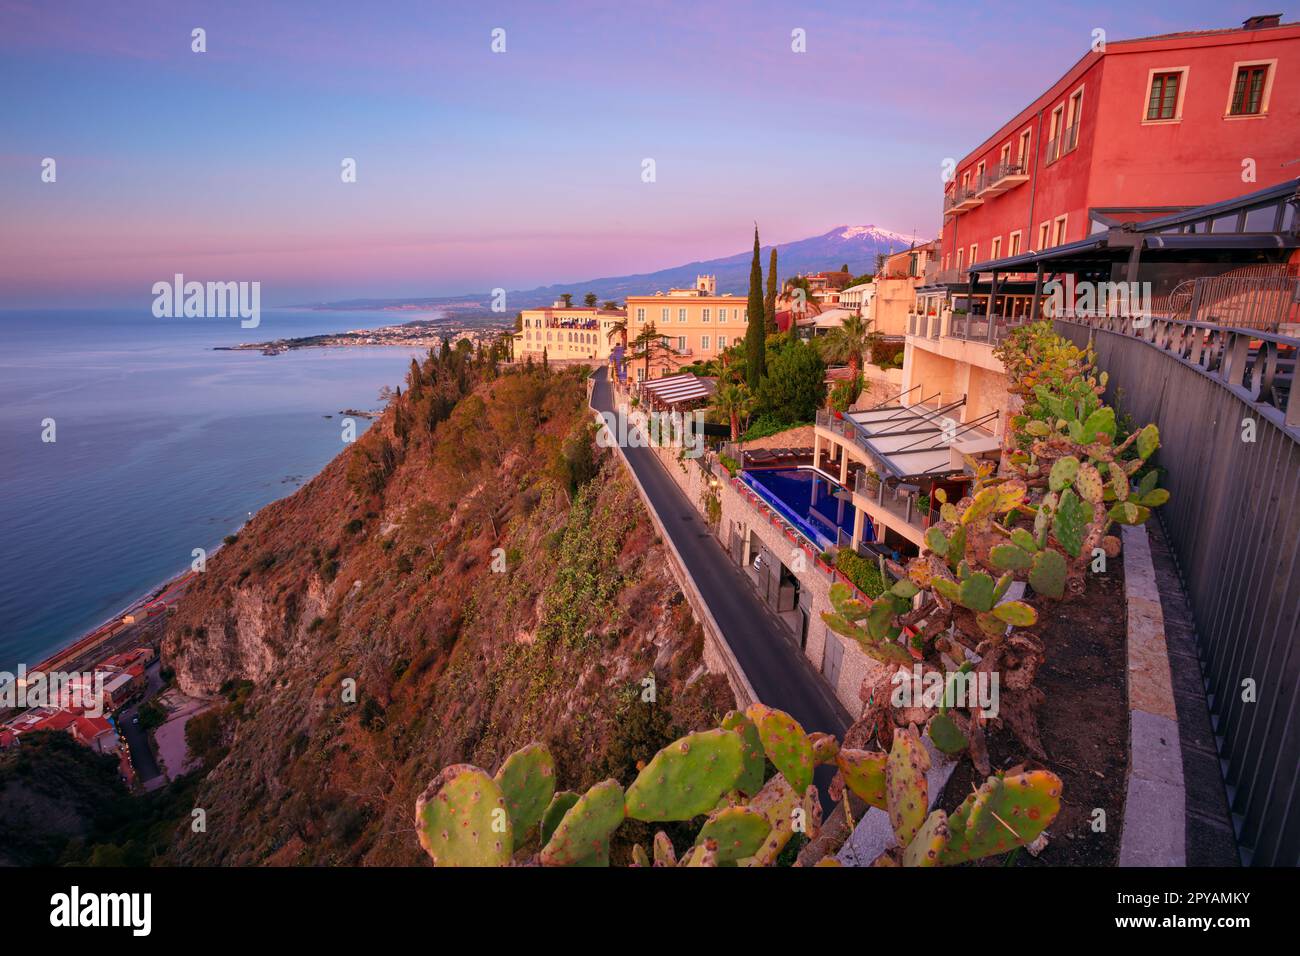 Taormina, Sicily, Italy. Cityscape image of picturesque town of Taormina, Sicily with volcano Mt. Etna in the background at sunrise. Stock Photo